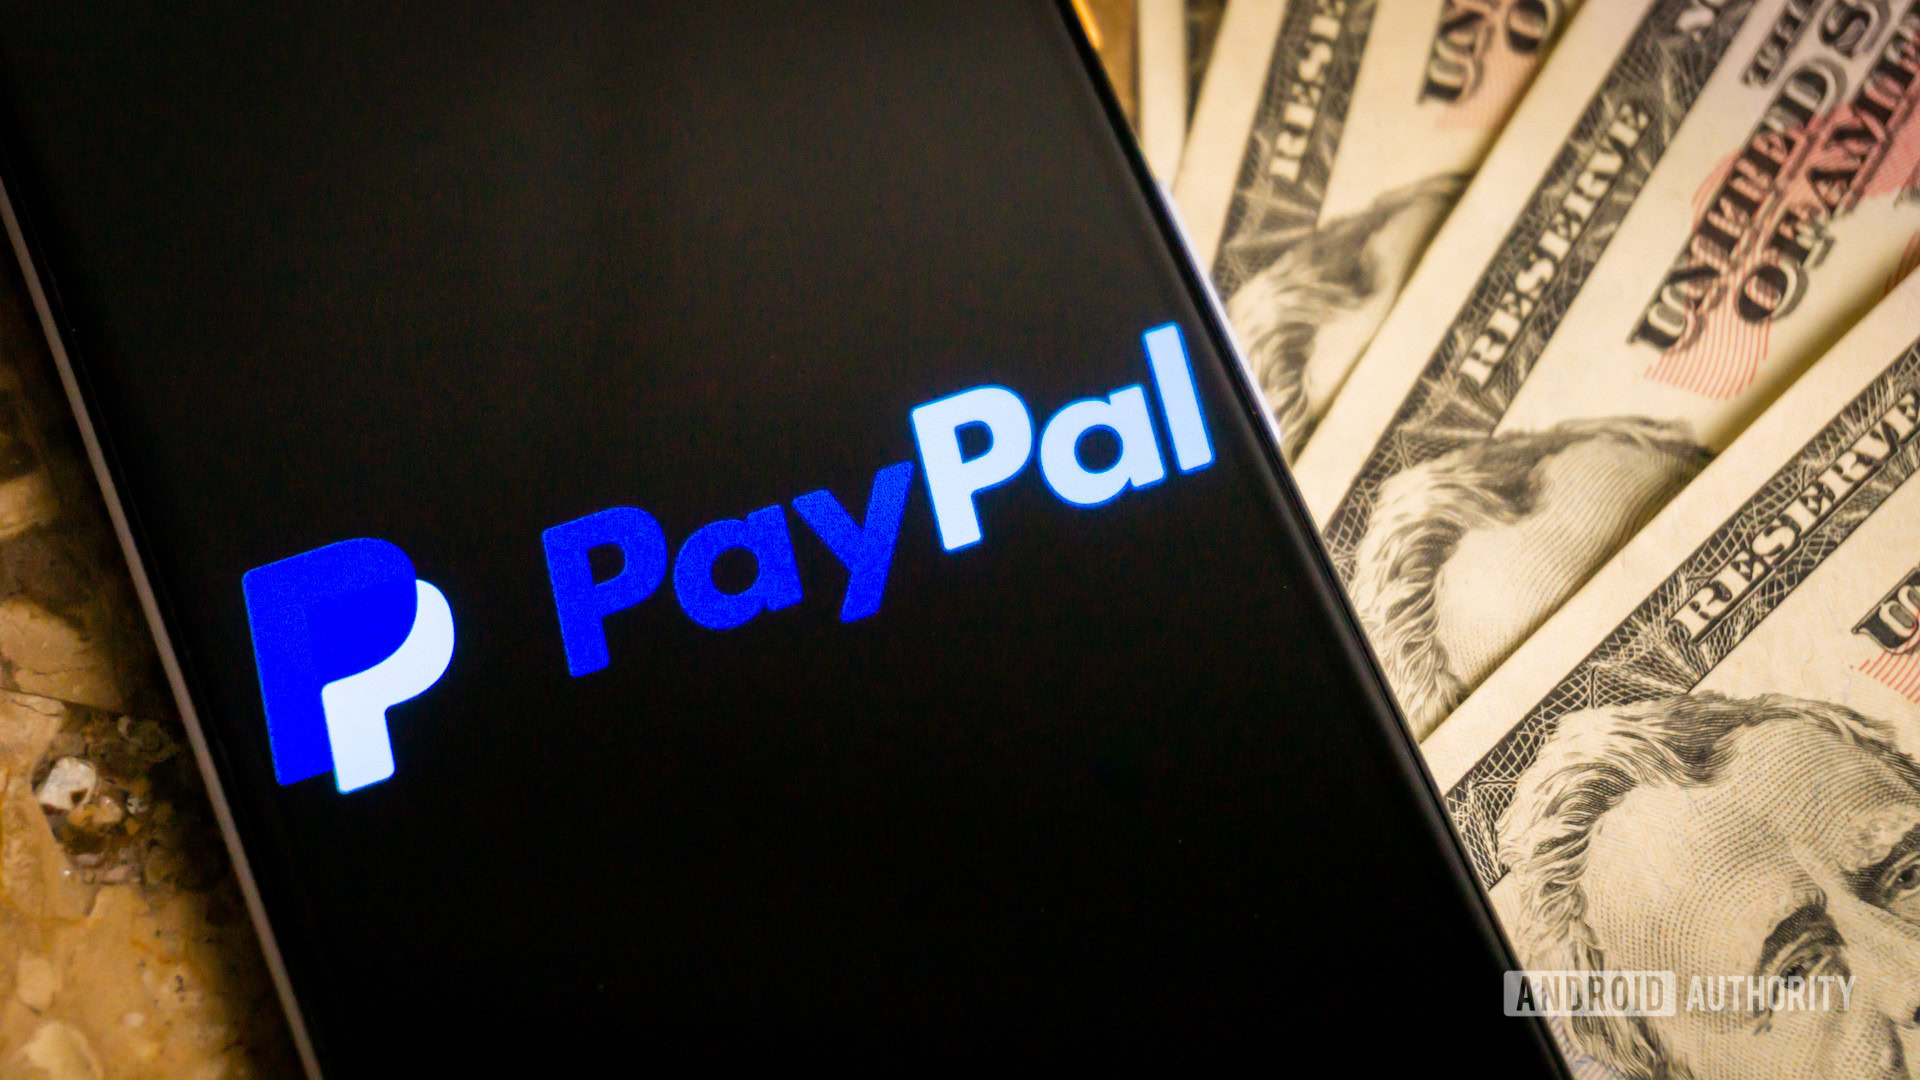 Paypal Account Frozen? What To Do To Get Your Funds Released